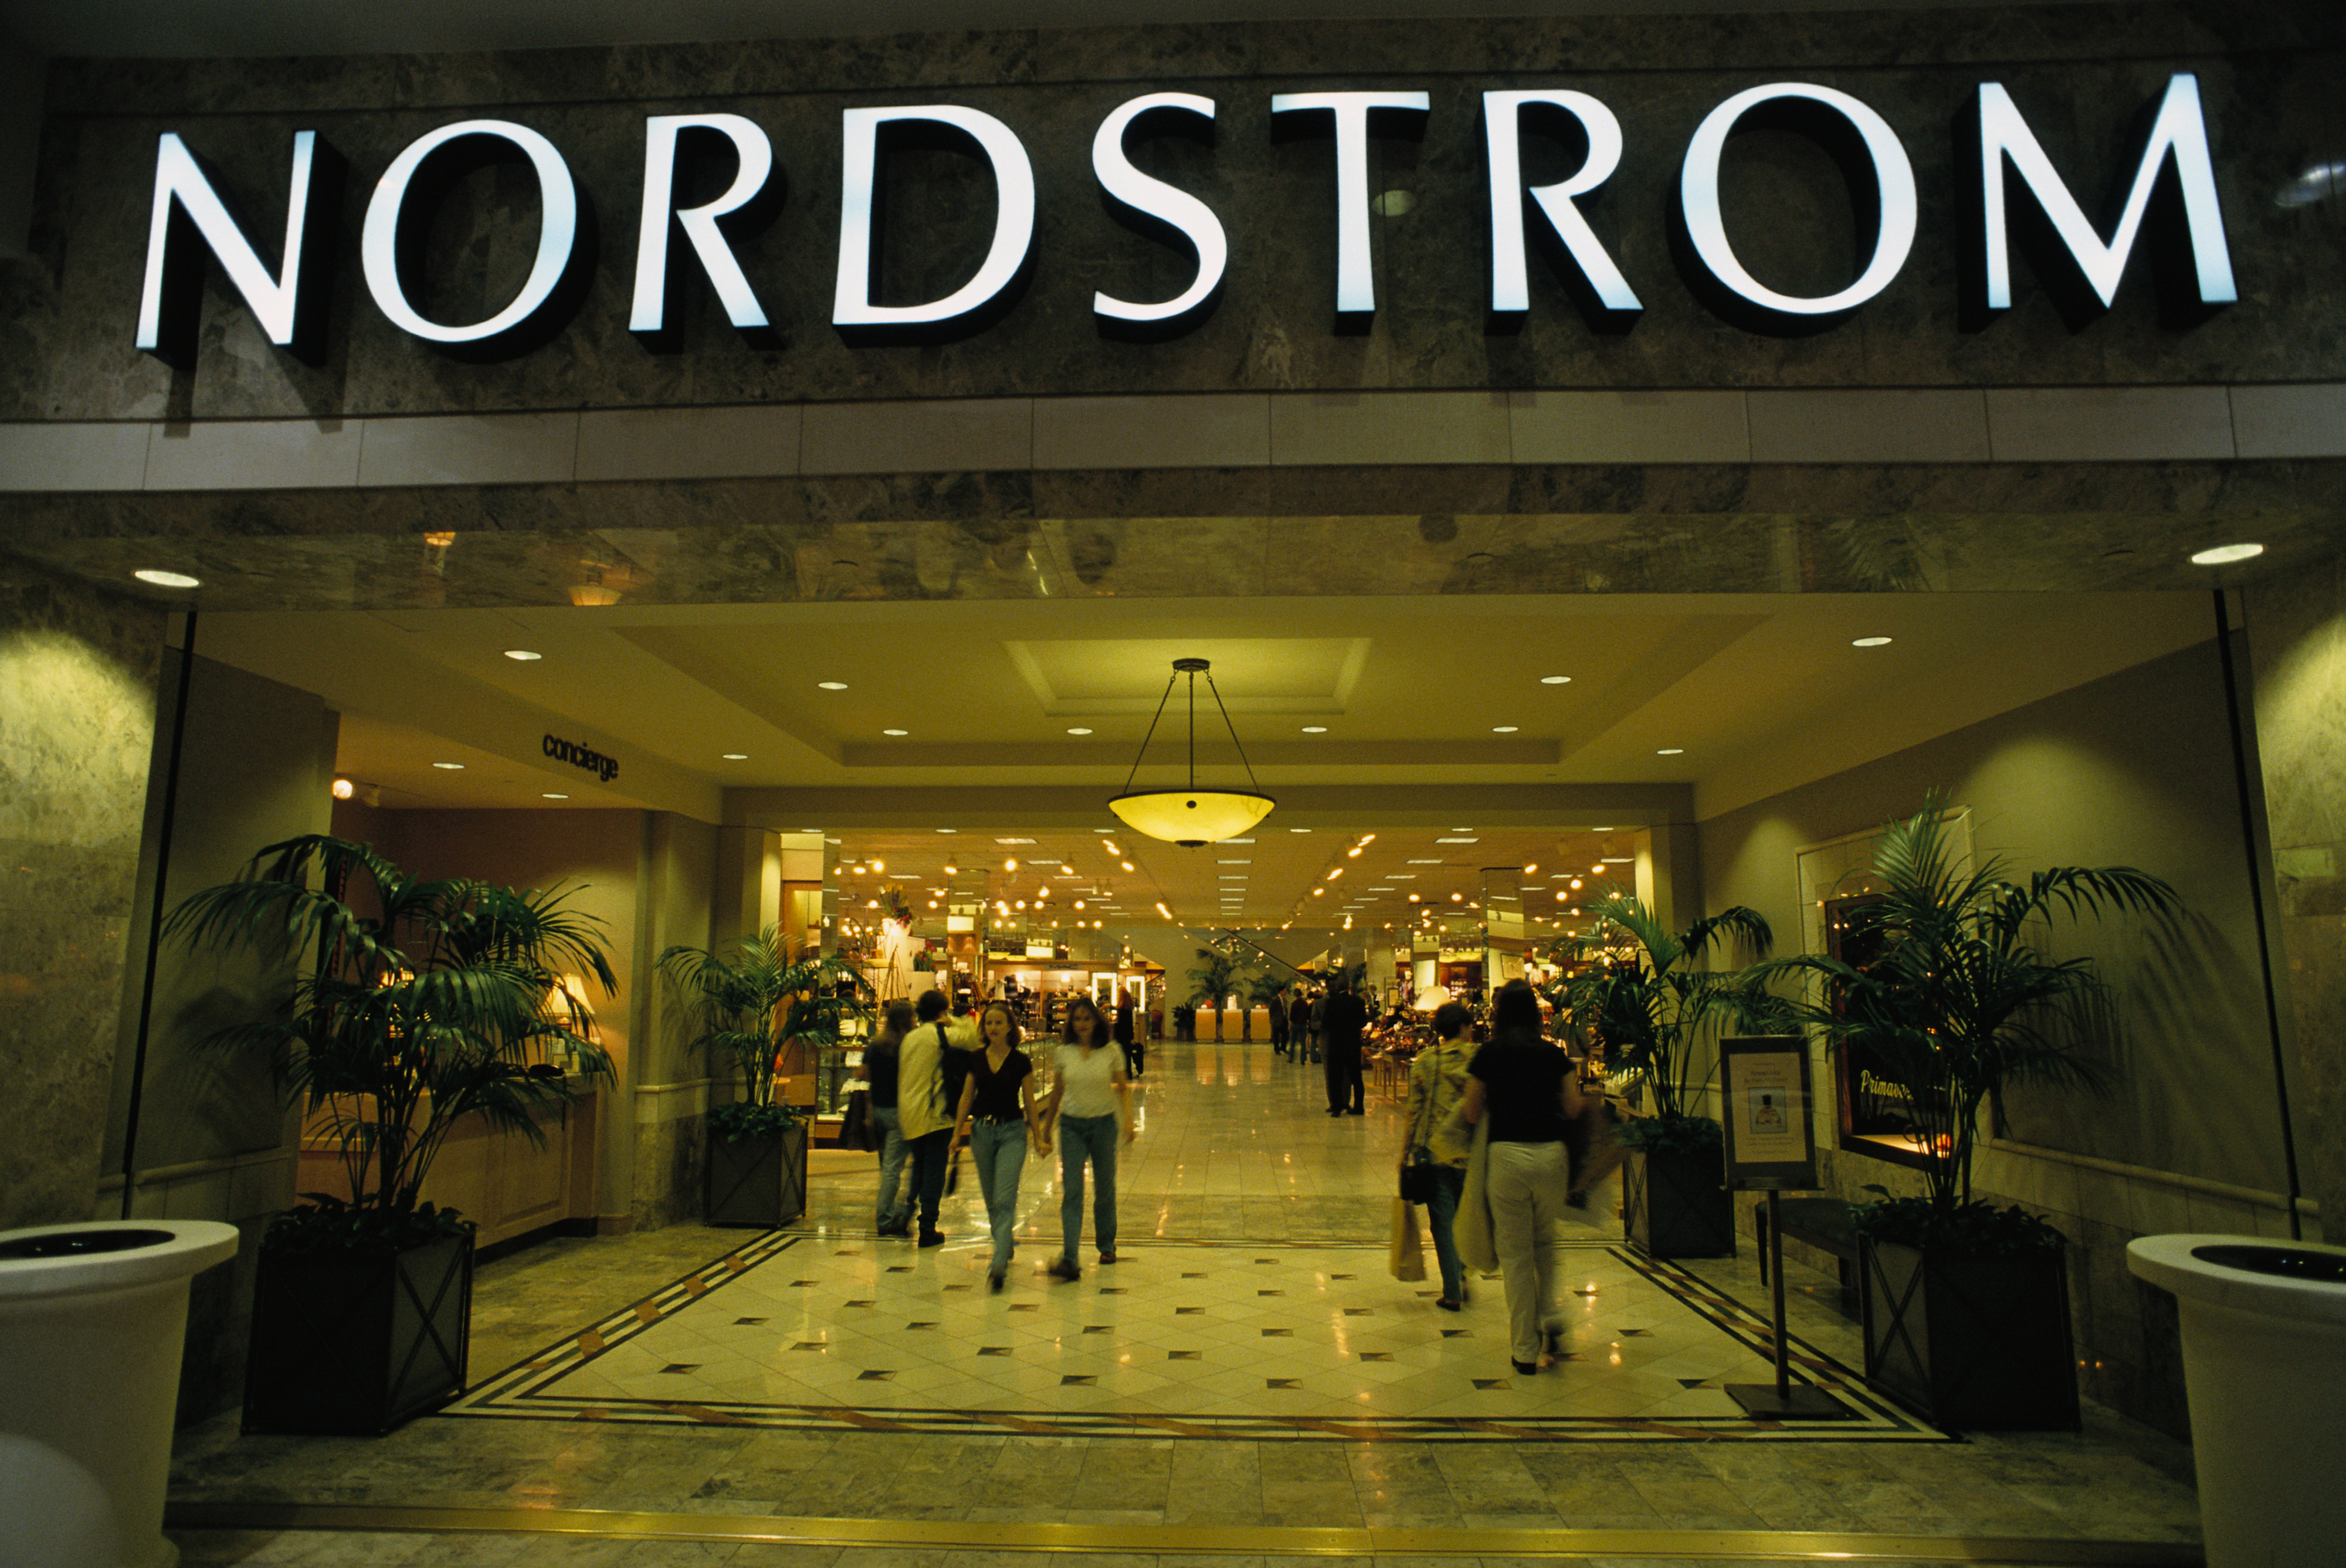 Entrance to Nordstrom store with shoppers walking in and out